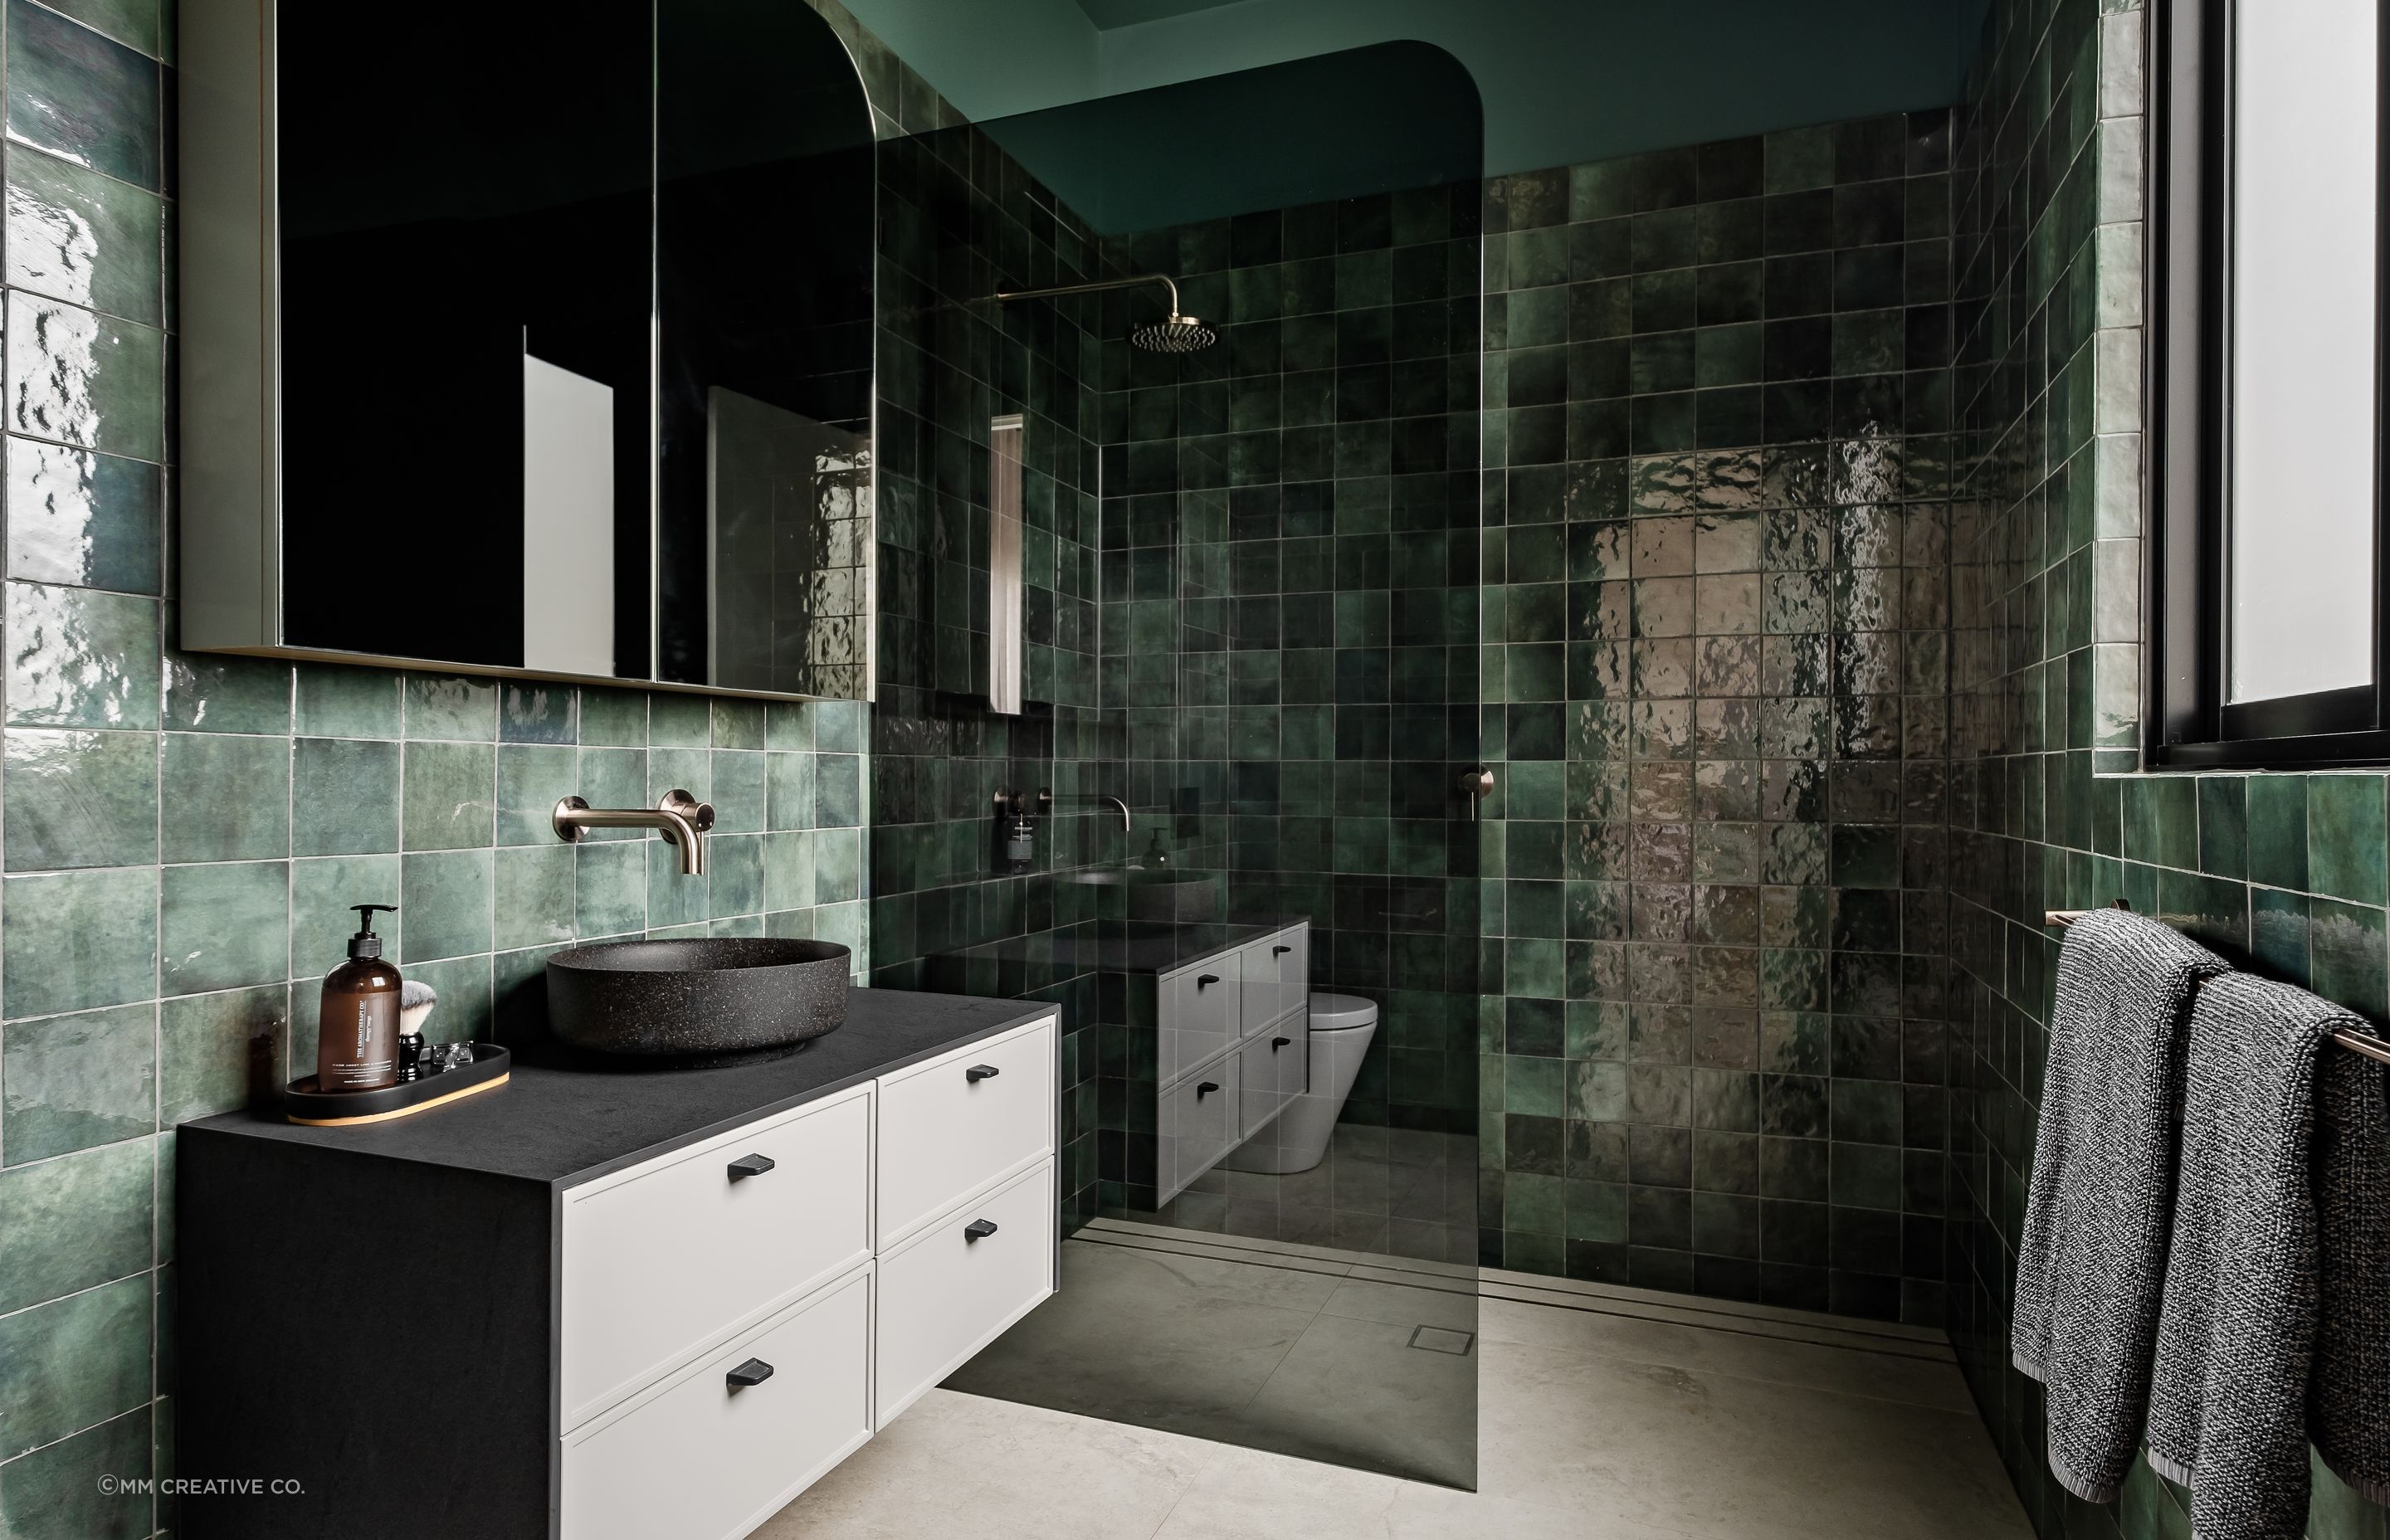 The green tiles in the bathroom create a rich and luxury palette and were chosen for the clients' love of green.